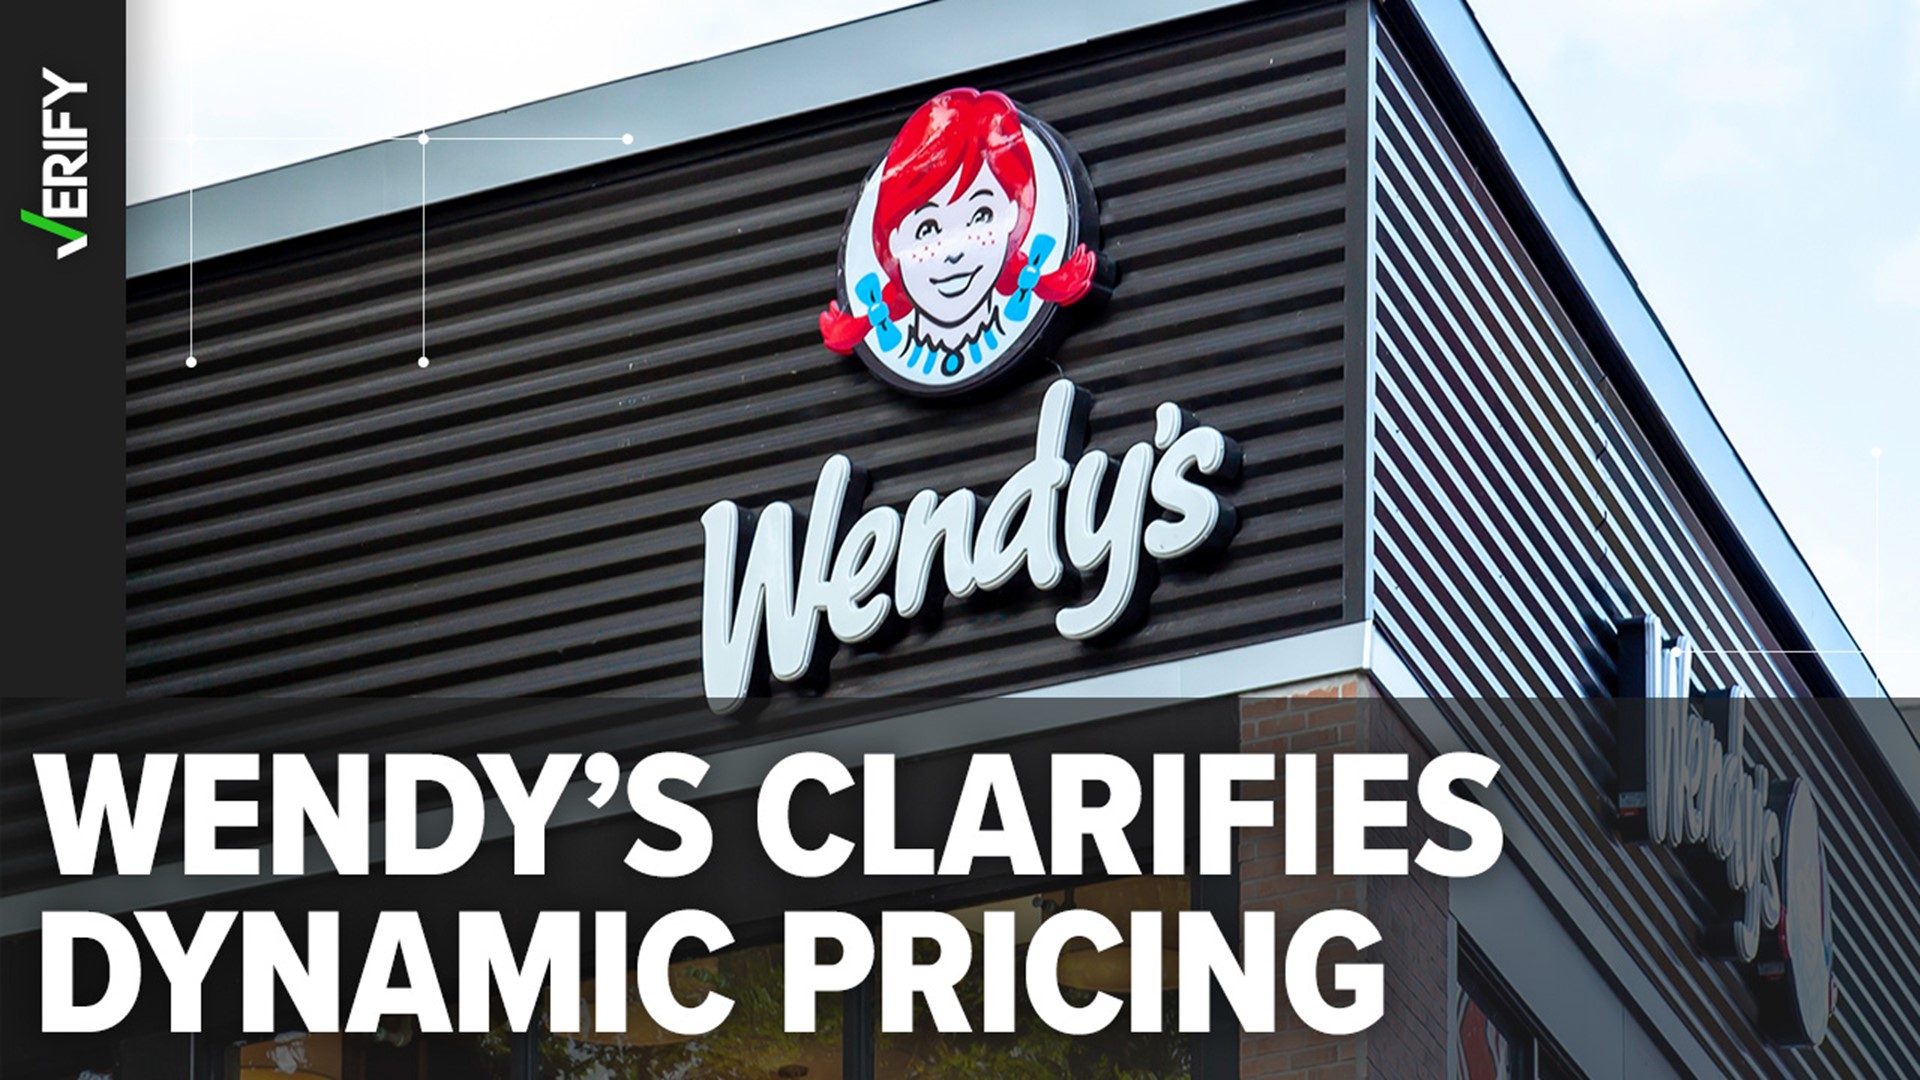 Wendy’s clarified that it has “no plans” to raise prices during peak hours after its CEO said the company would test a dynamic pricing model at its restaurants.